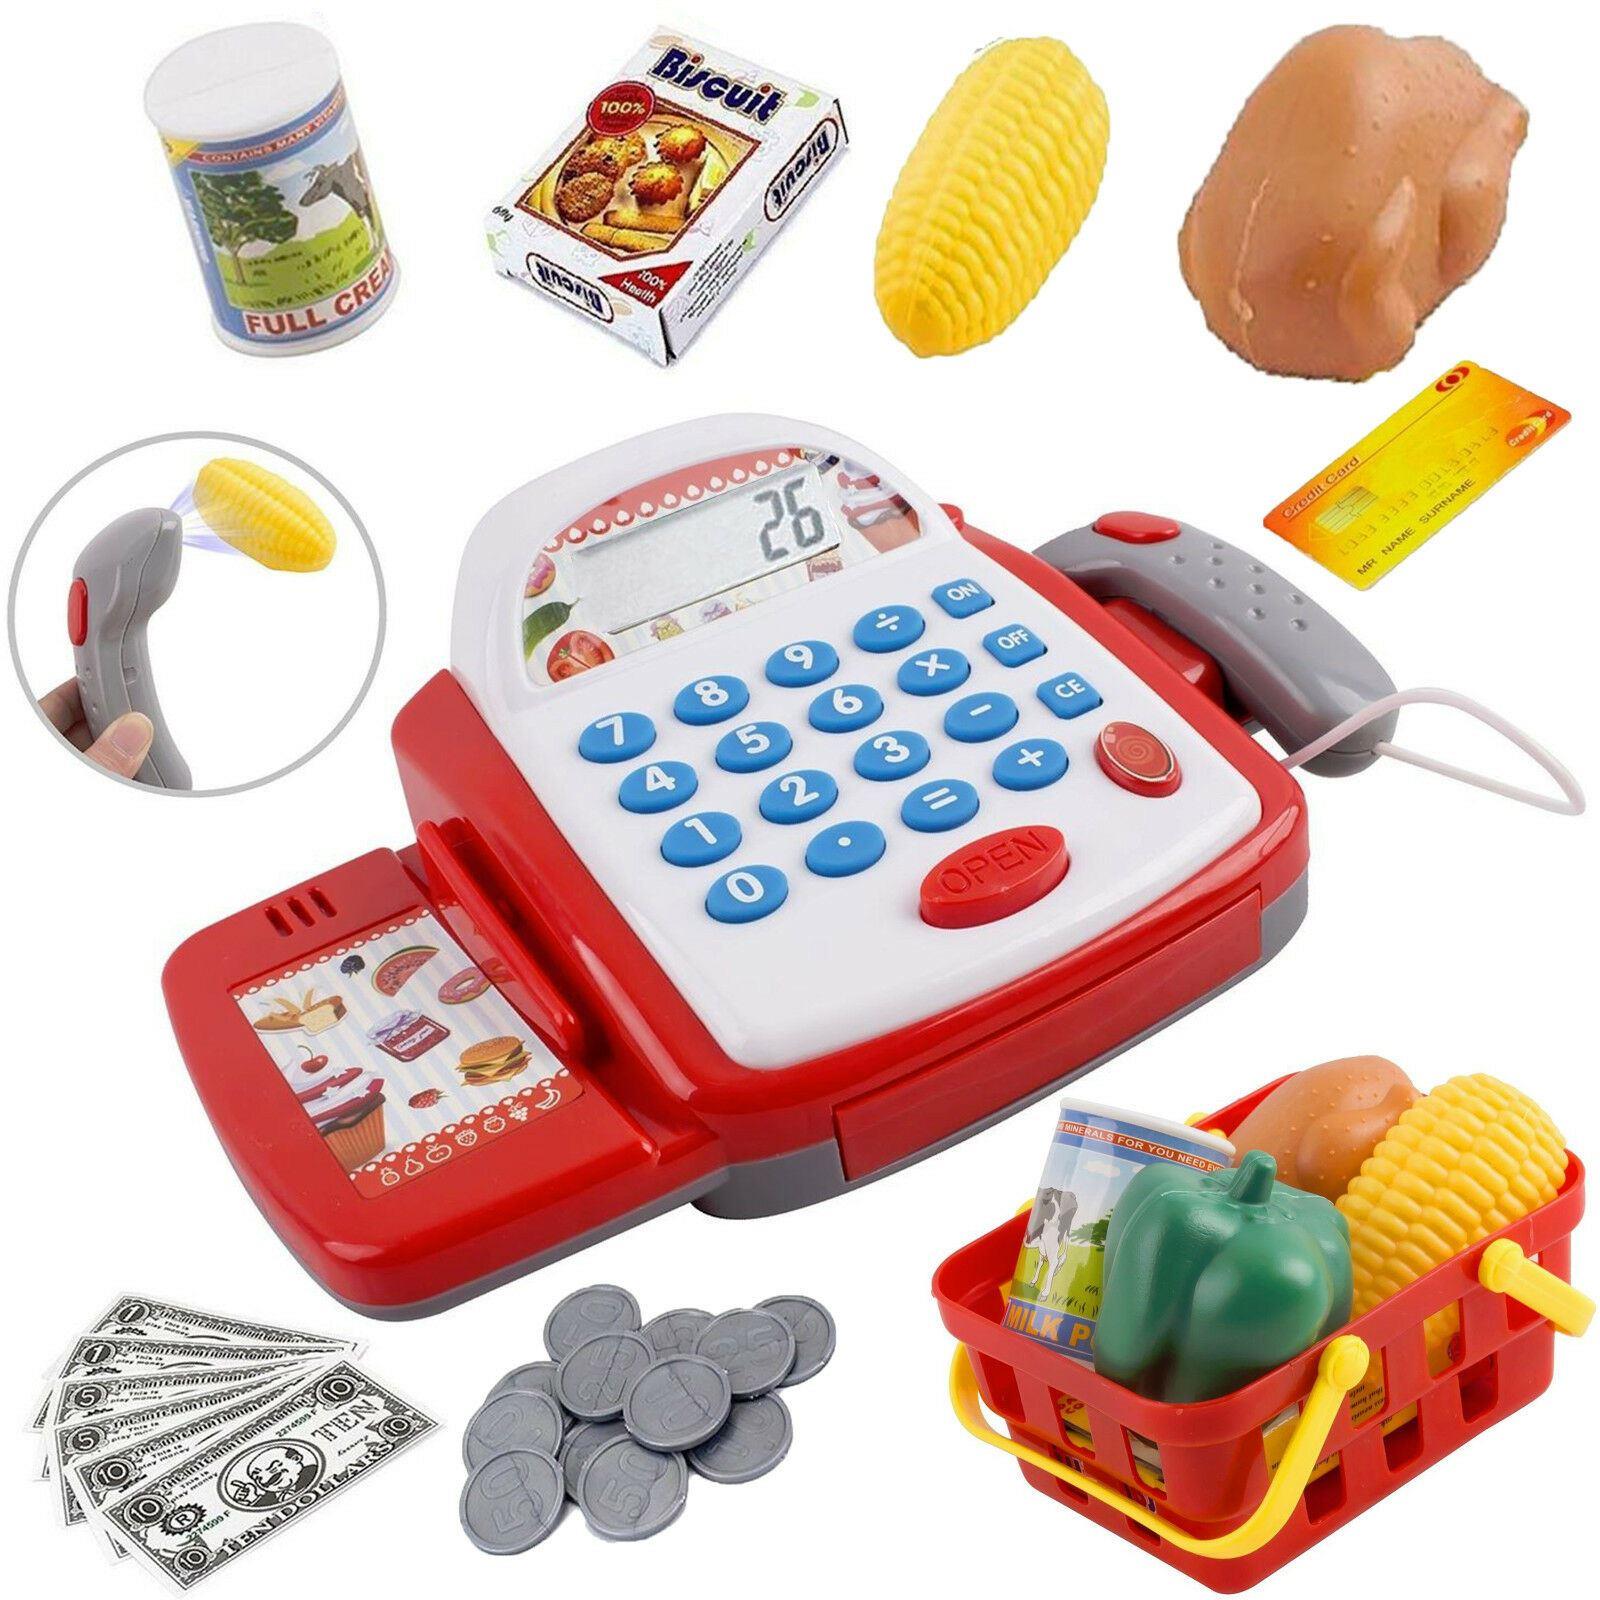 White & Red Cash Register Toy by The Magic Toy Shop - The Magic Toy Shop